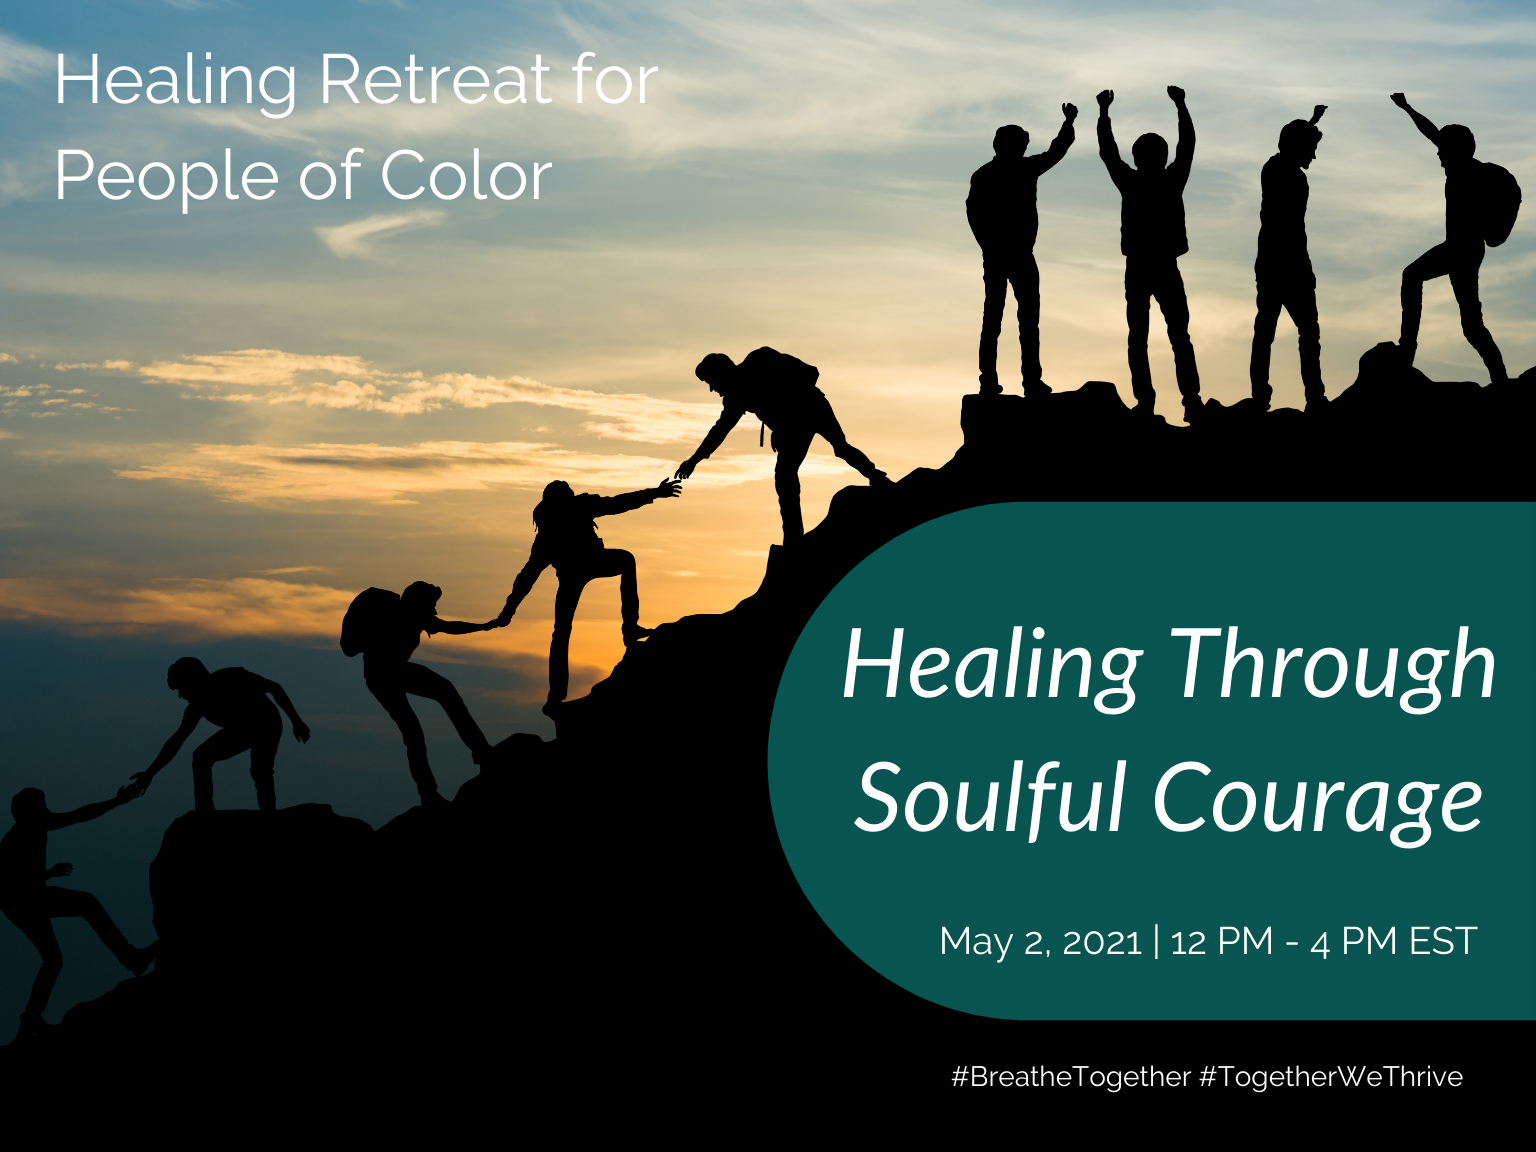 HEALING RETREAT FOR PEOPLE OF COLOR